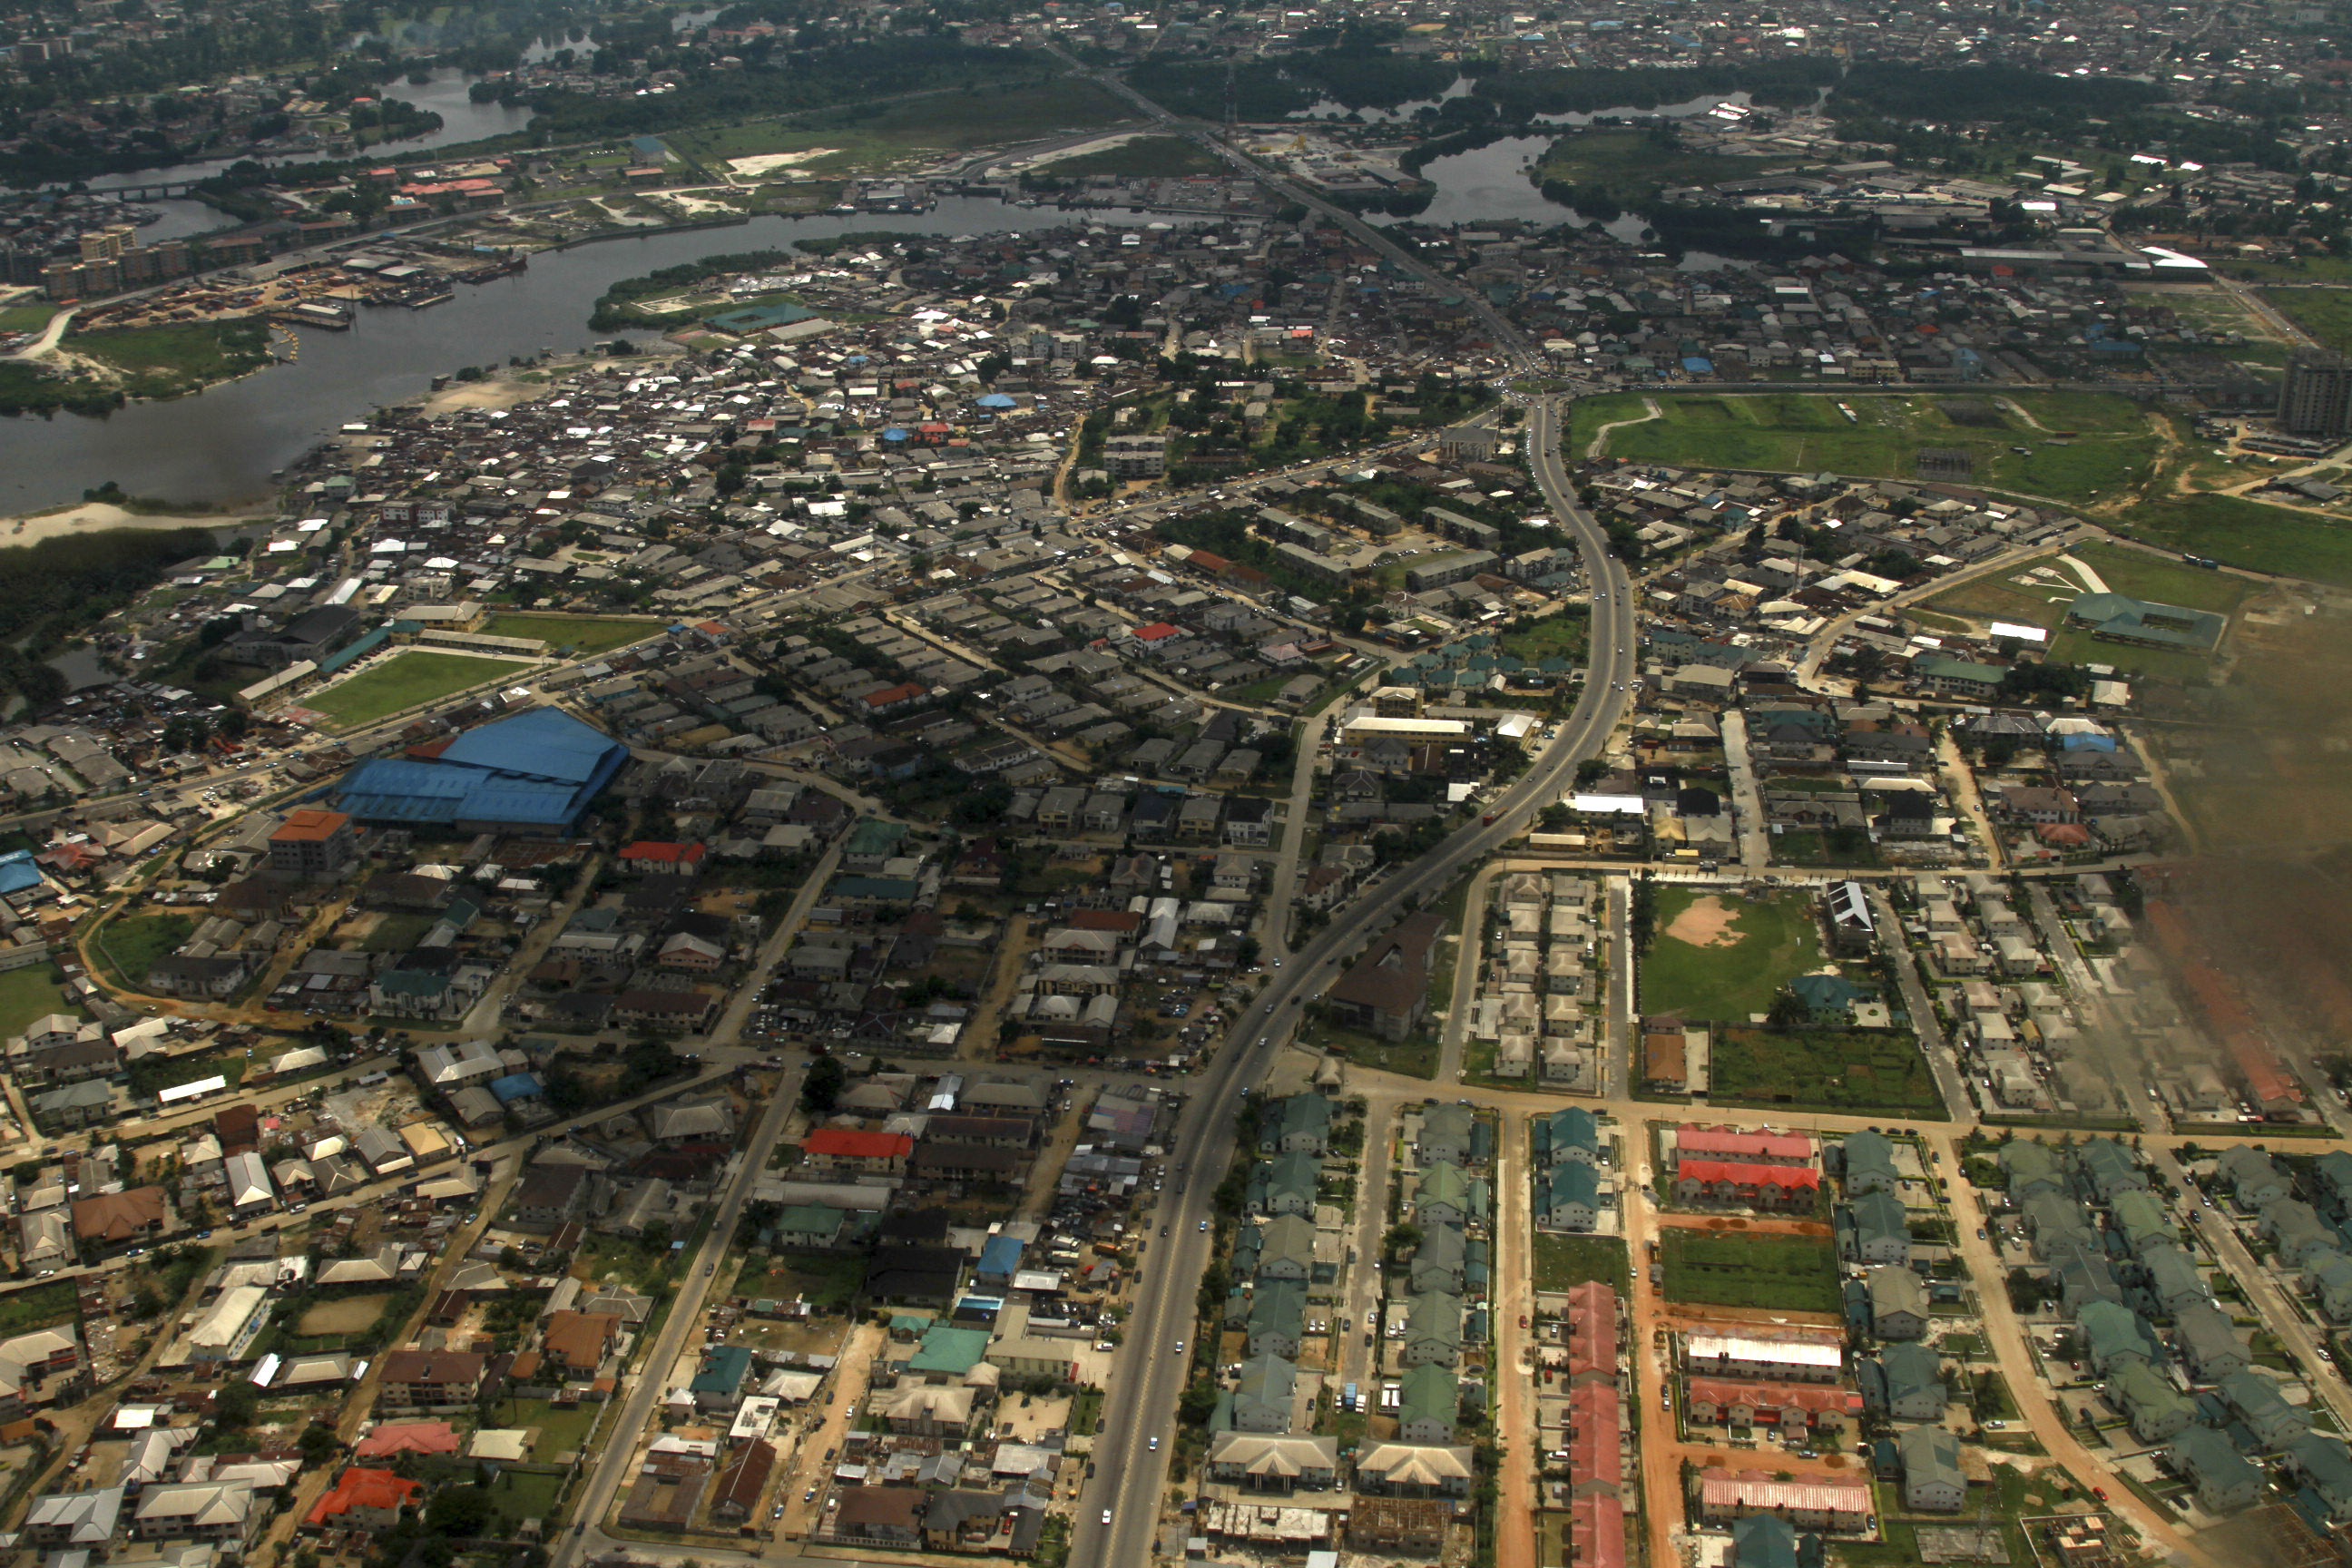 An aerial view of the oil hub city Port Harcourt in Nigeria's Delta region May 16, 2012. (Akintunde Akinleye / Reuters—REUTERS)